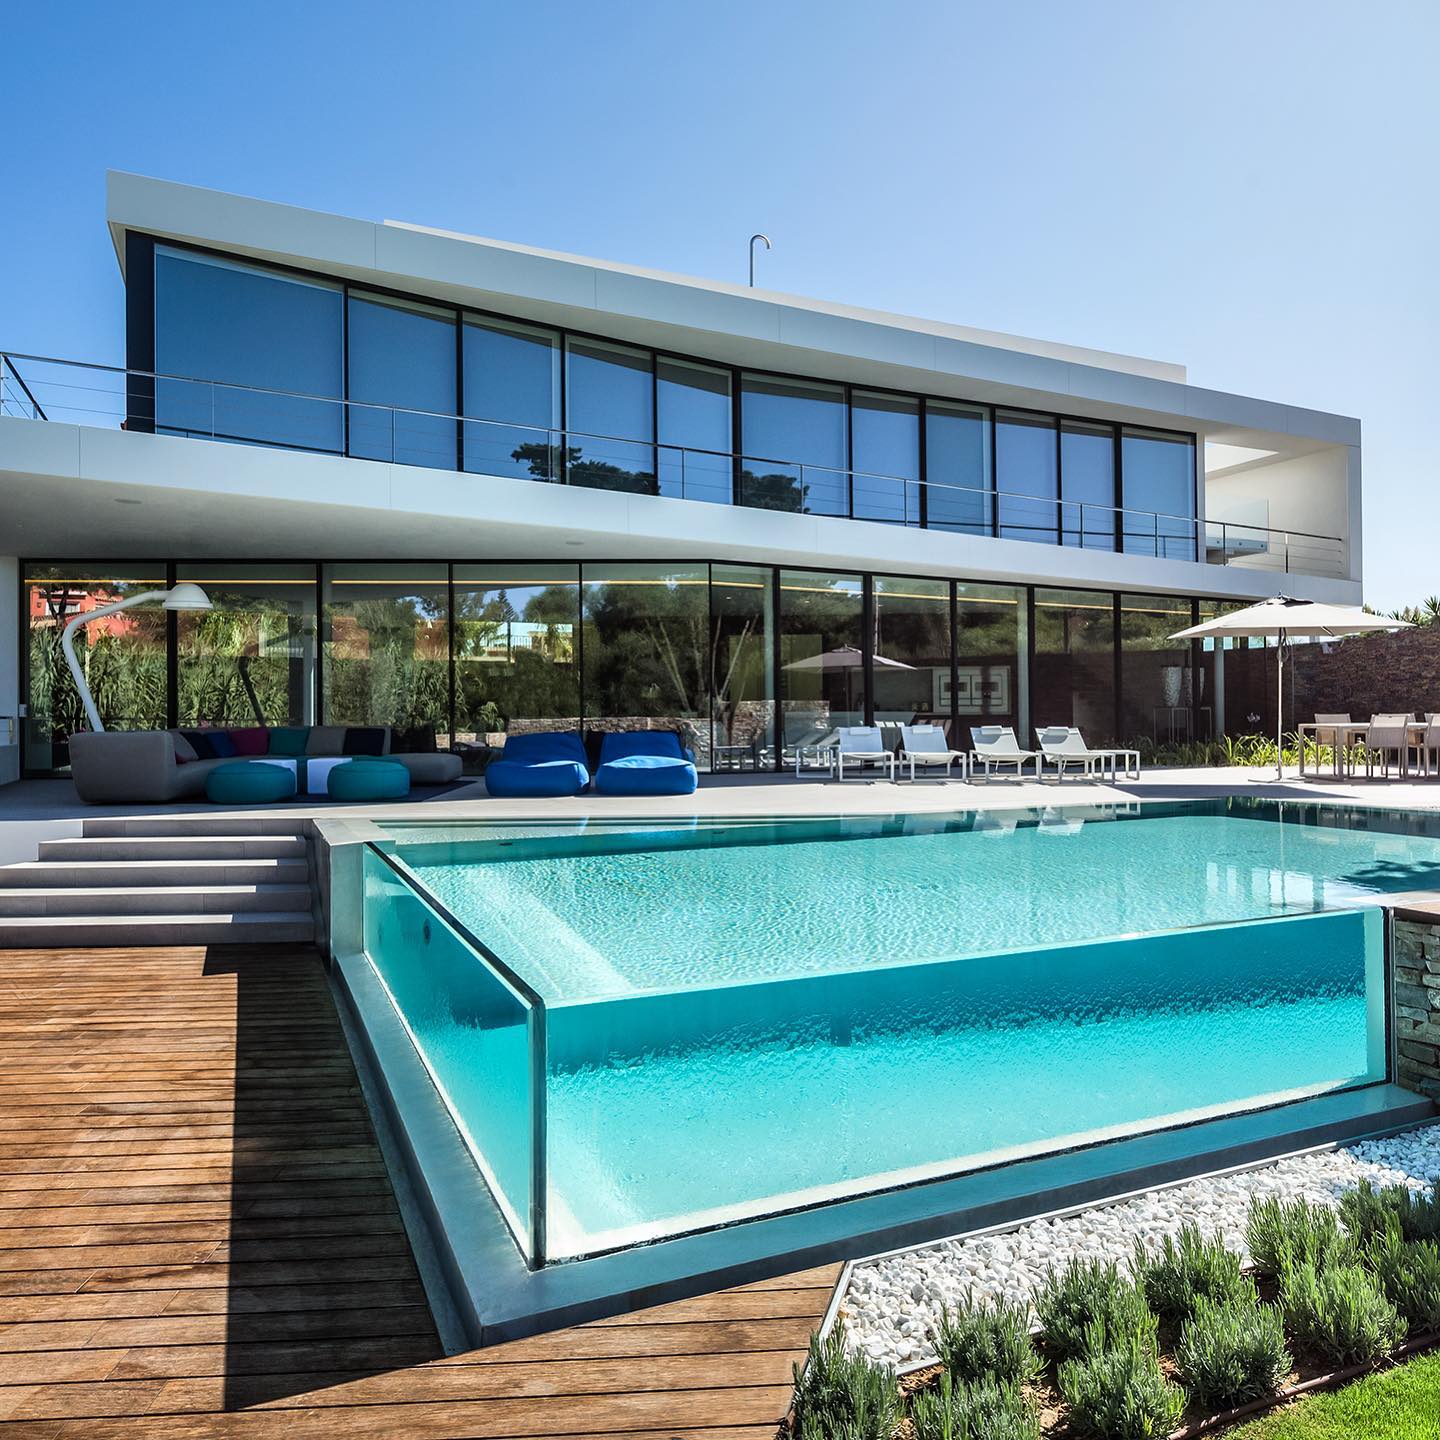 modern home with light blue pool with glass walls on the deck. Photo via Instagram user @iqglassinternational